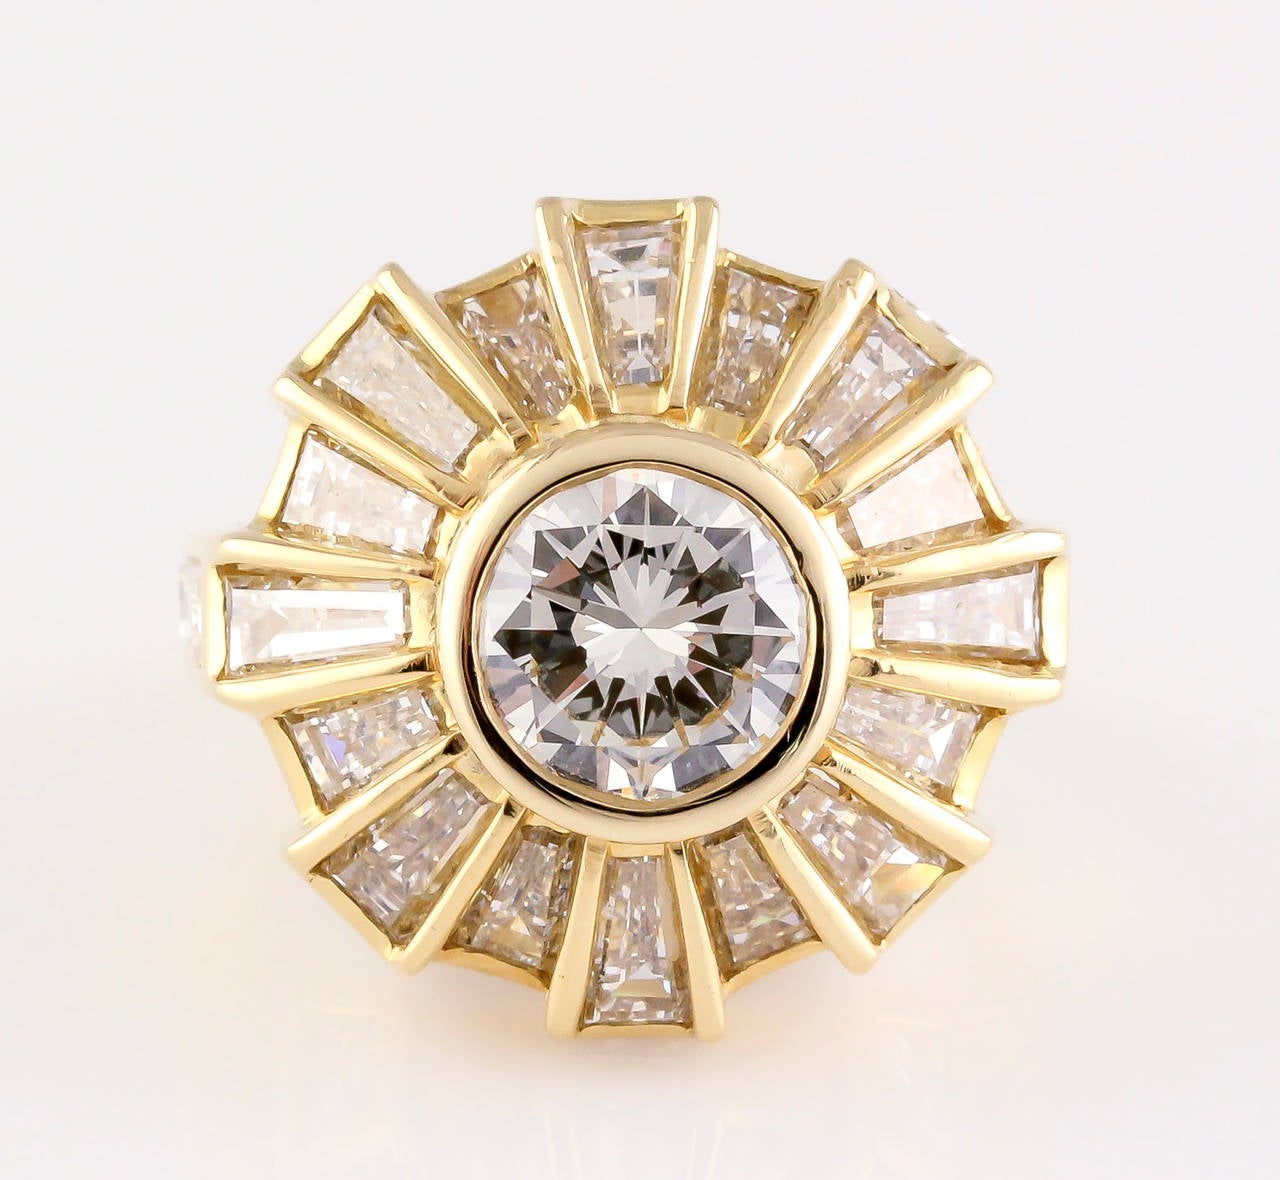 Very fine diamond and 18K yellow gold ring by Bulgari. It features very high grade round and an array of baguette cut diamonds. Central stone is approx. 1.75-2.0 cts, approx. G-H color and VS clarity, with a total combined carat weight of approx.